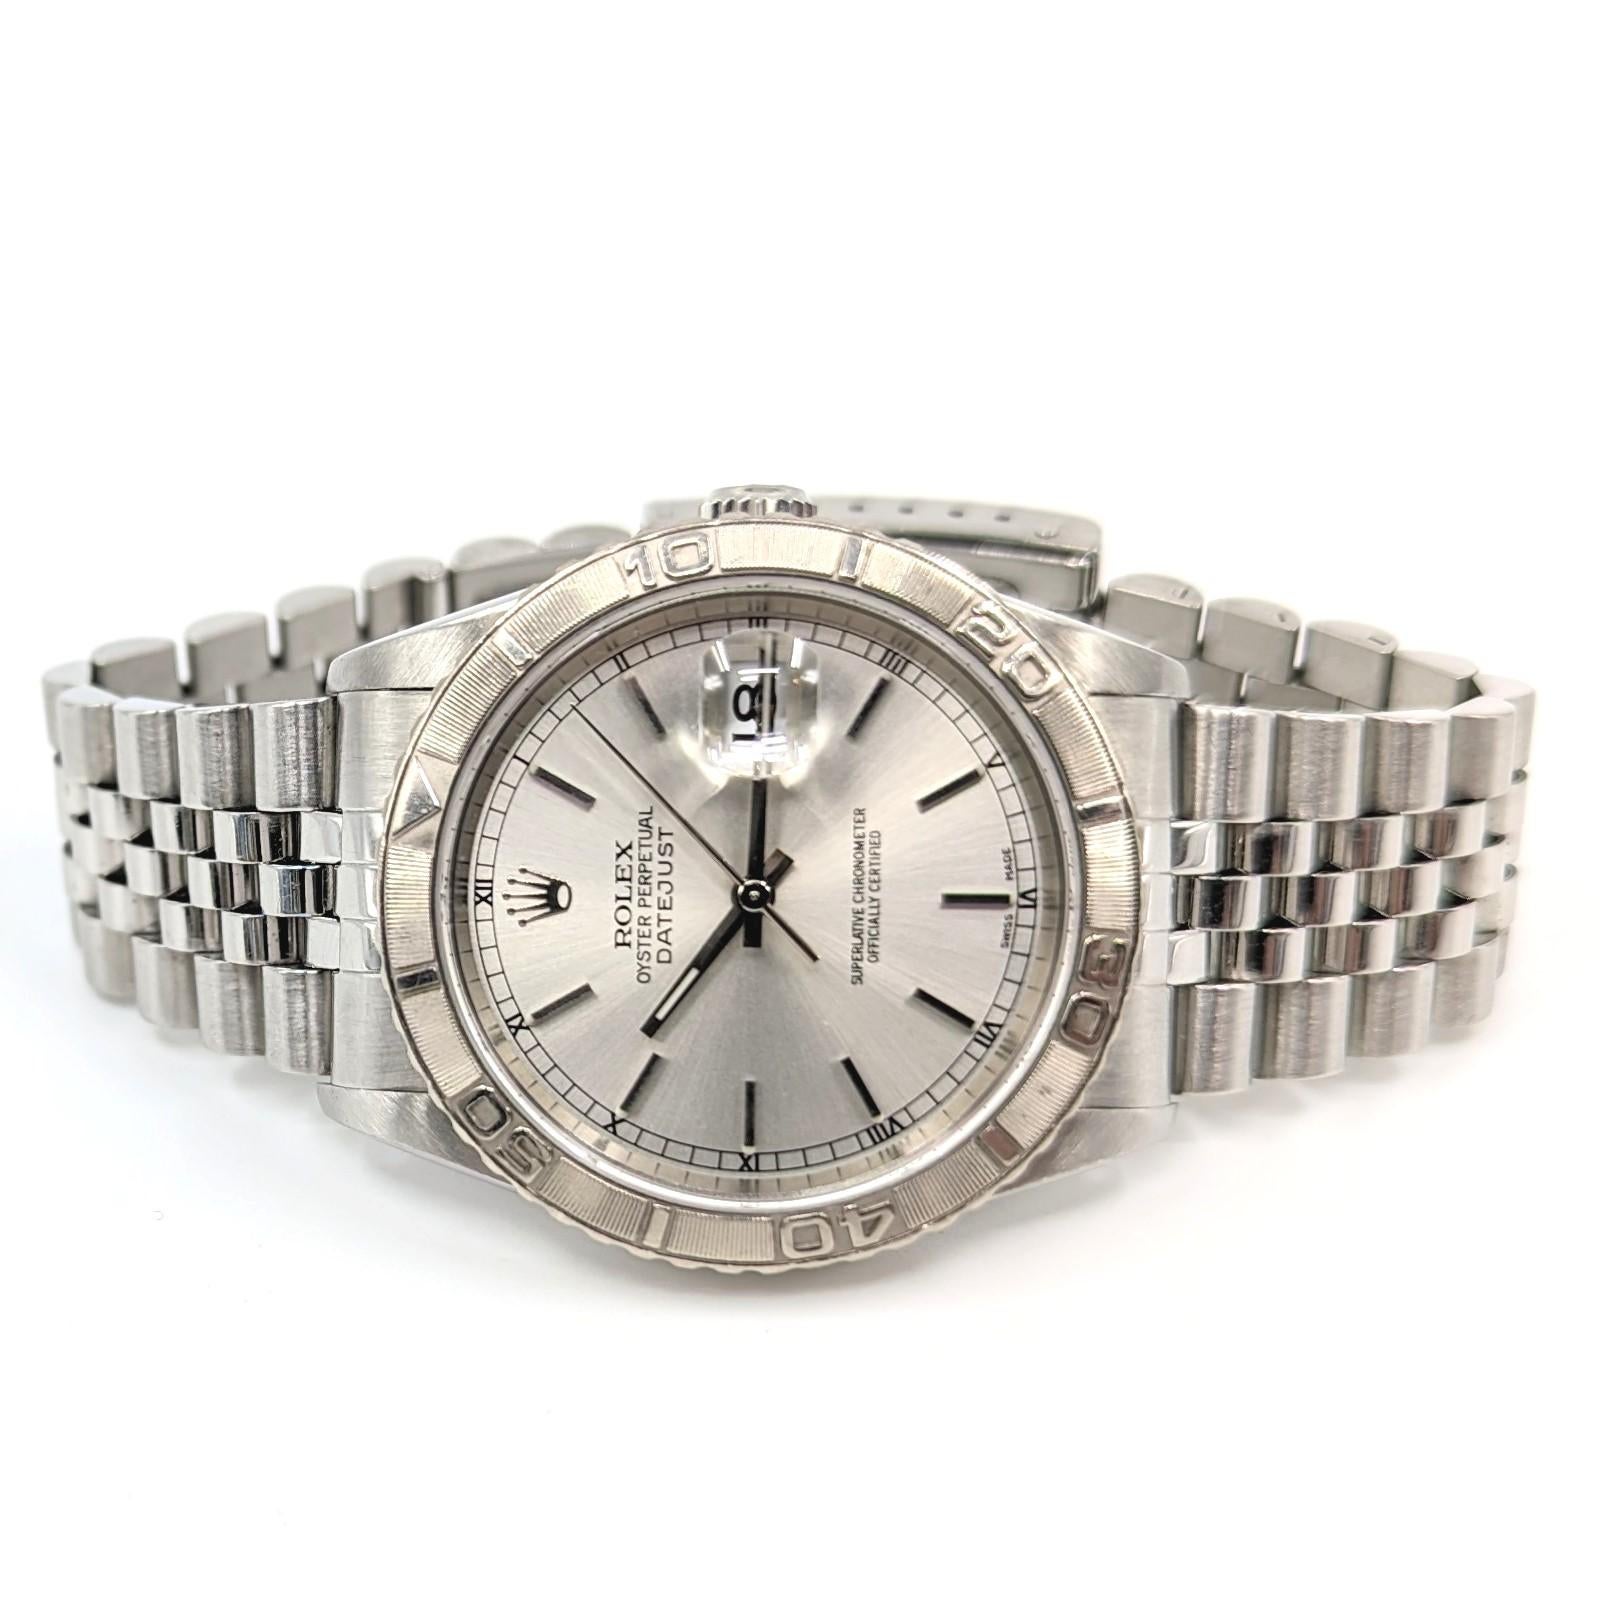 A fine and collectible Gent's Rolex Oyster Perpetual Datejust Turn-o-graph 